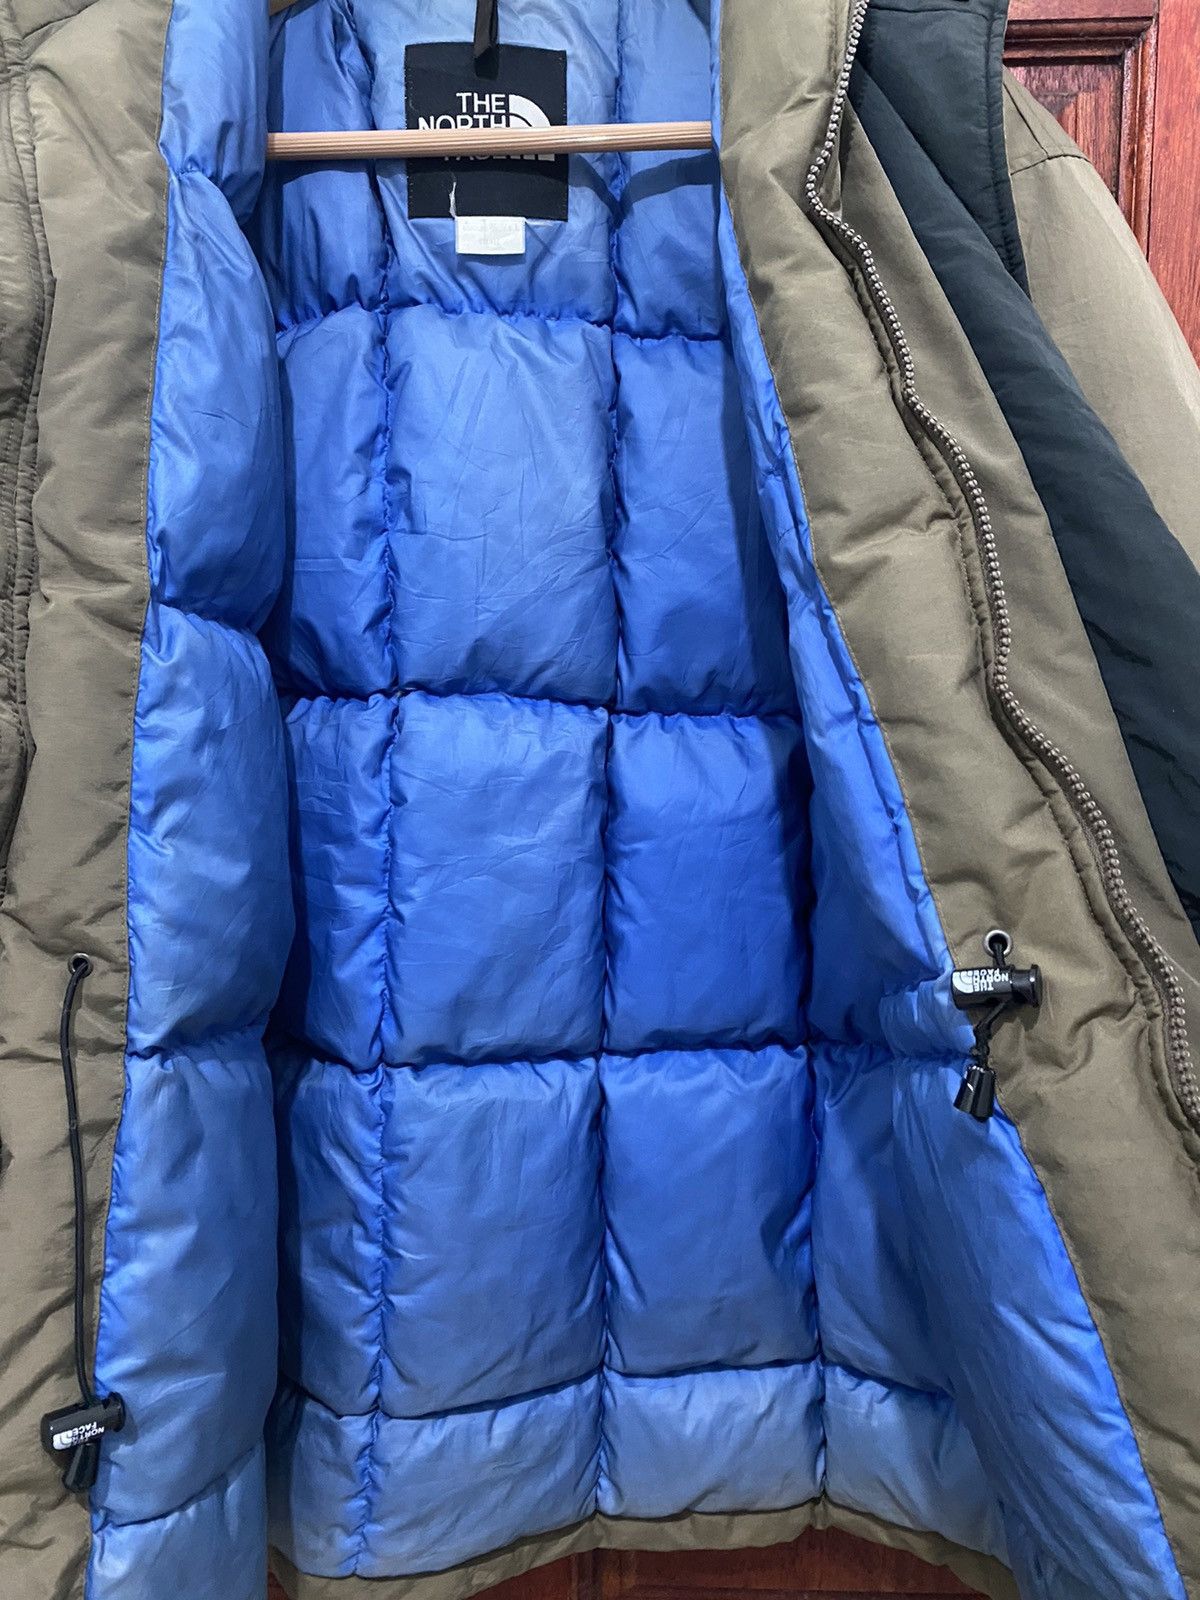 The North Face Puffer Jacket - 6